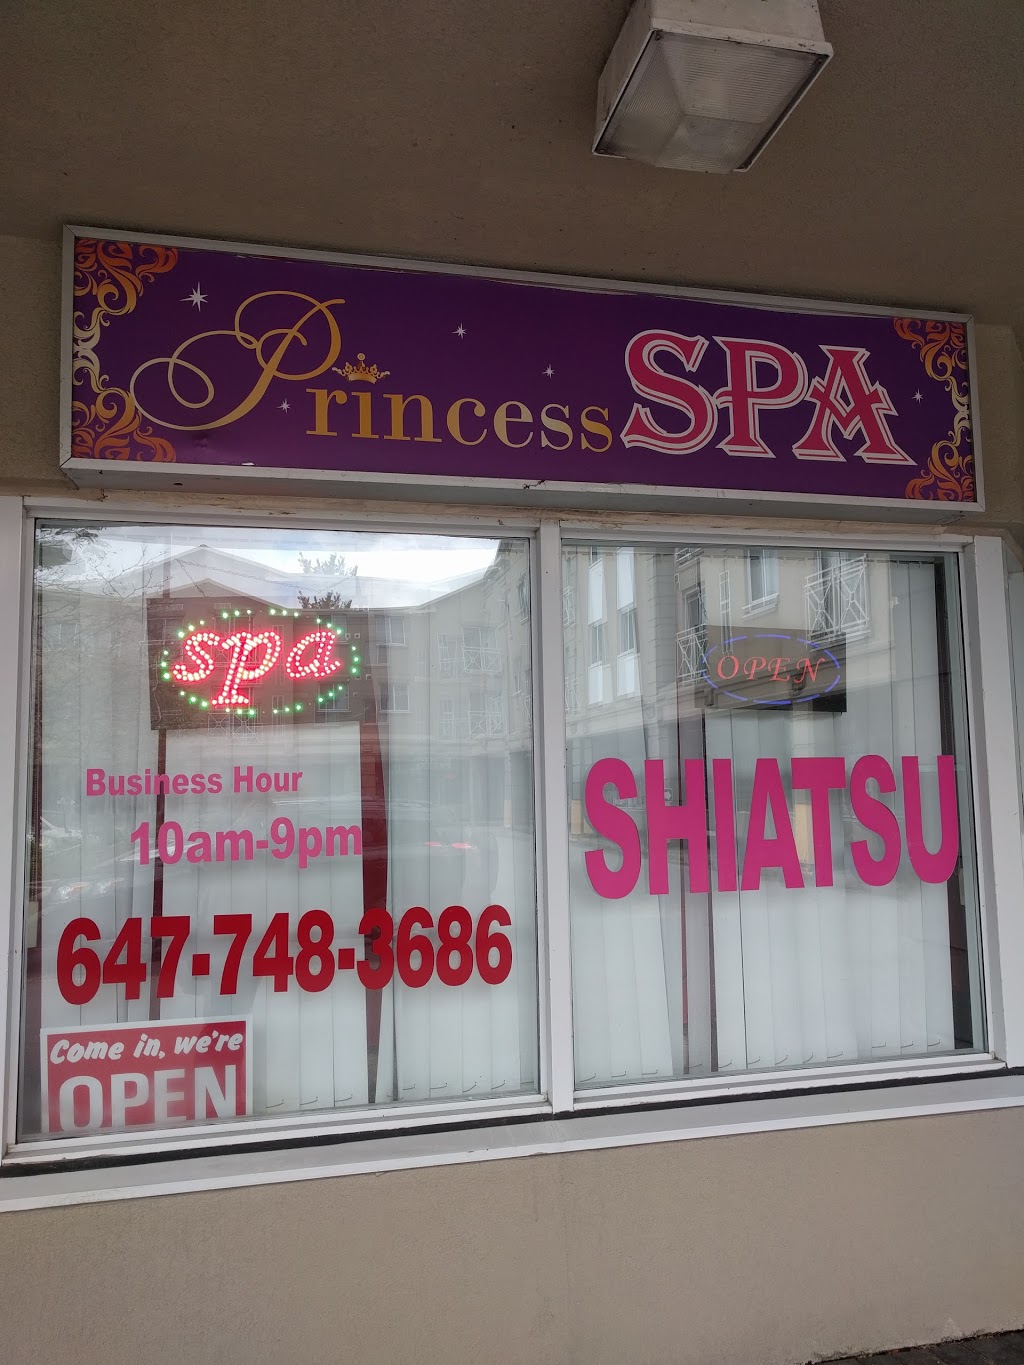 Princess Spa | spa | 2351 Kennedy Rd #108, Scarborough, ON M1T 3G9, Canada | 6477483686 OR +1 647-748-3686